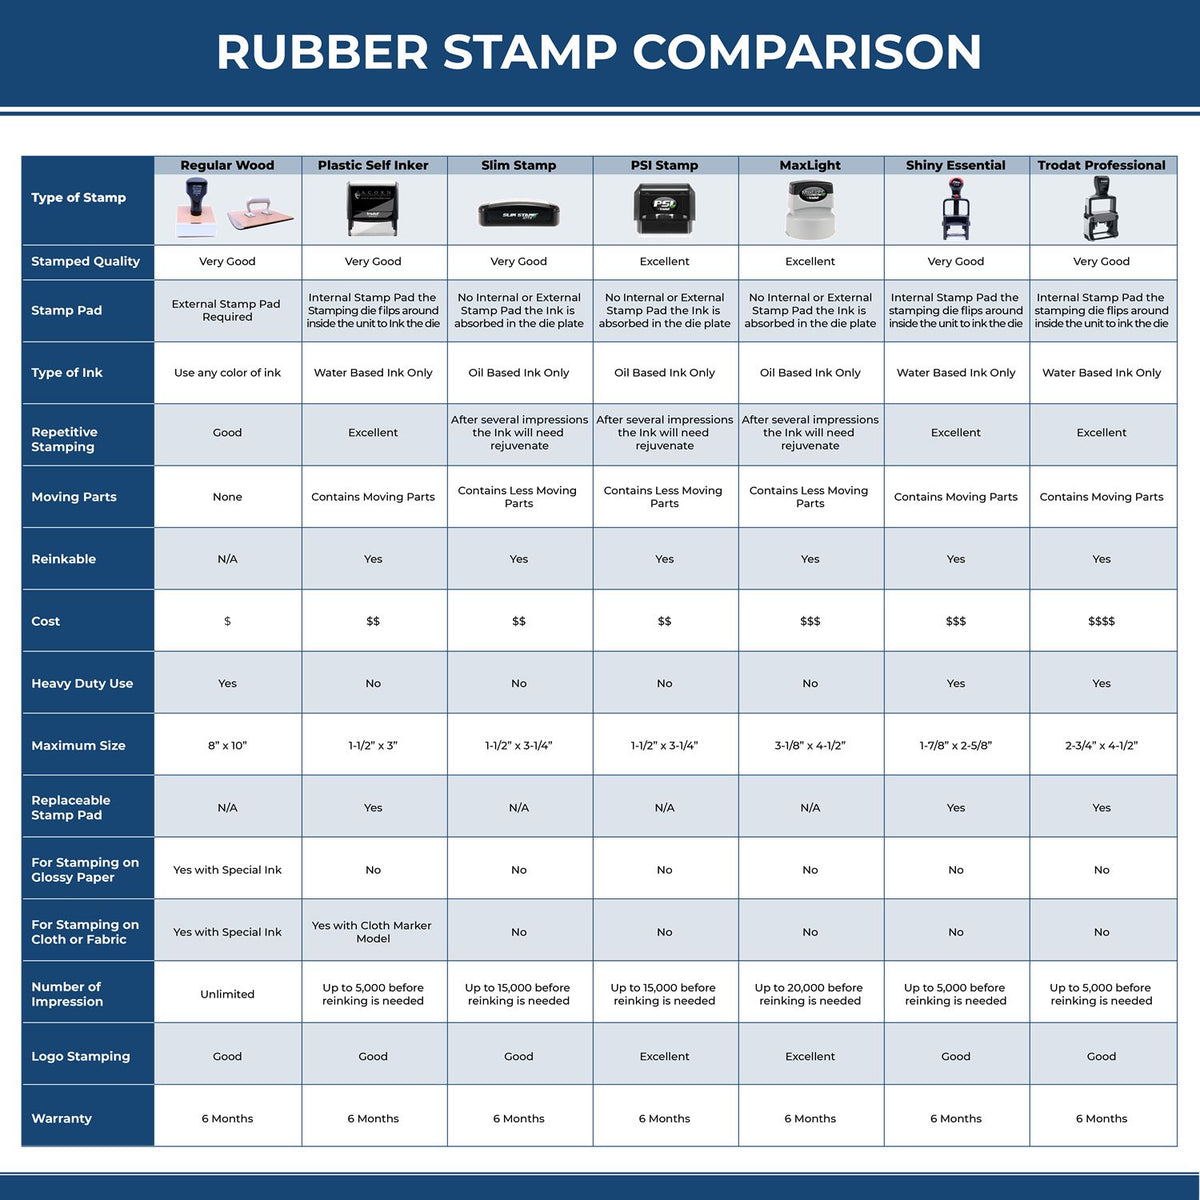 A comparison chart for the different types of mount models available for the Self-Inking North Carolina PE Stamp.